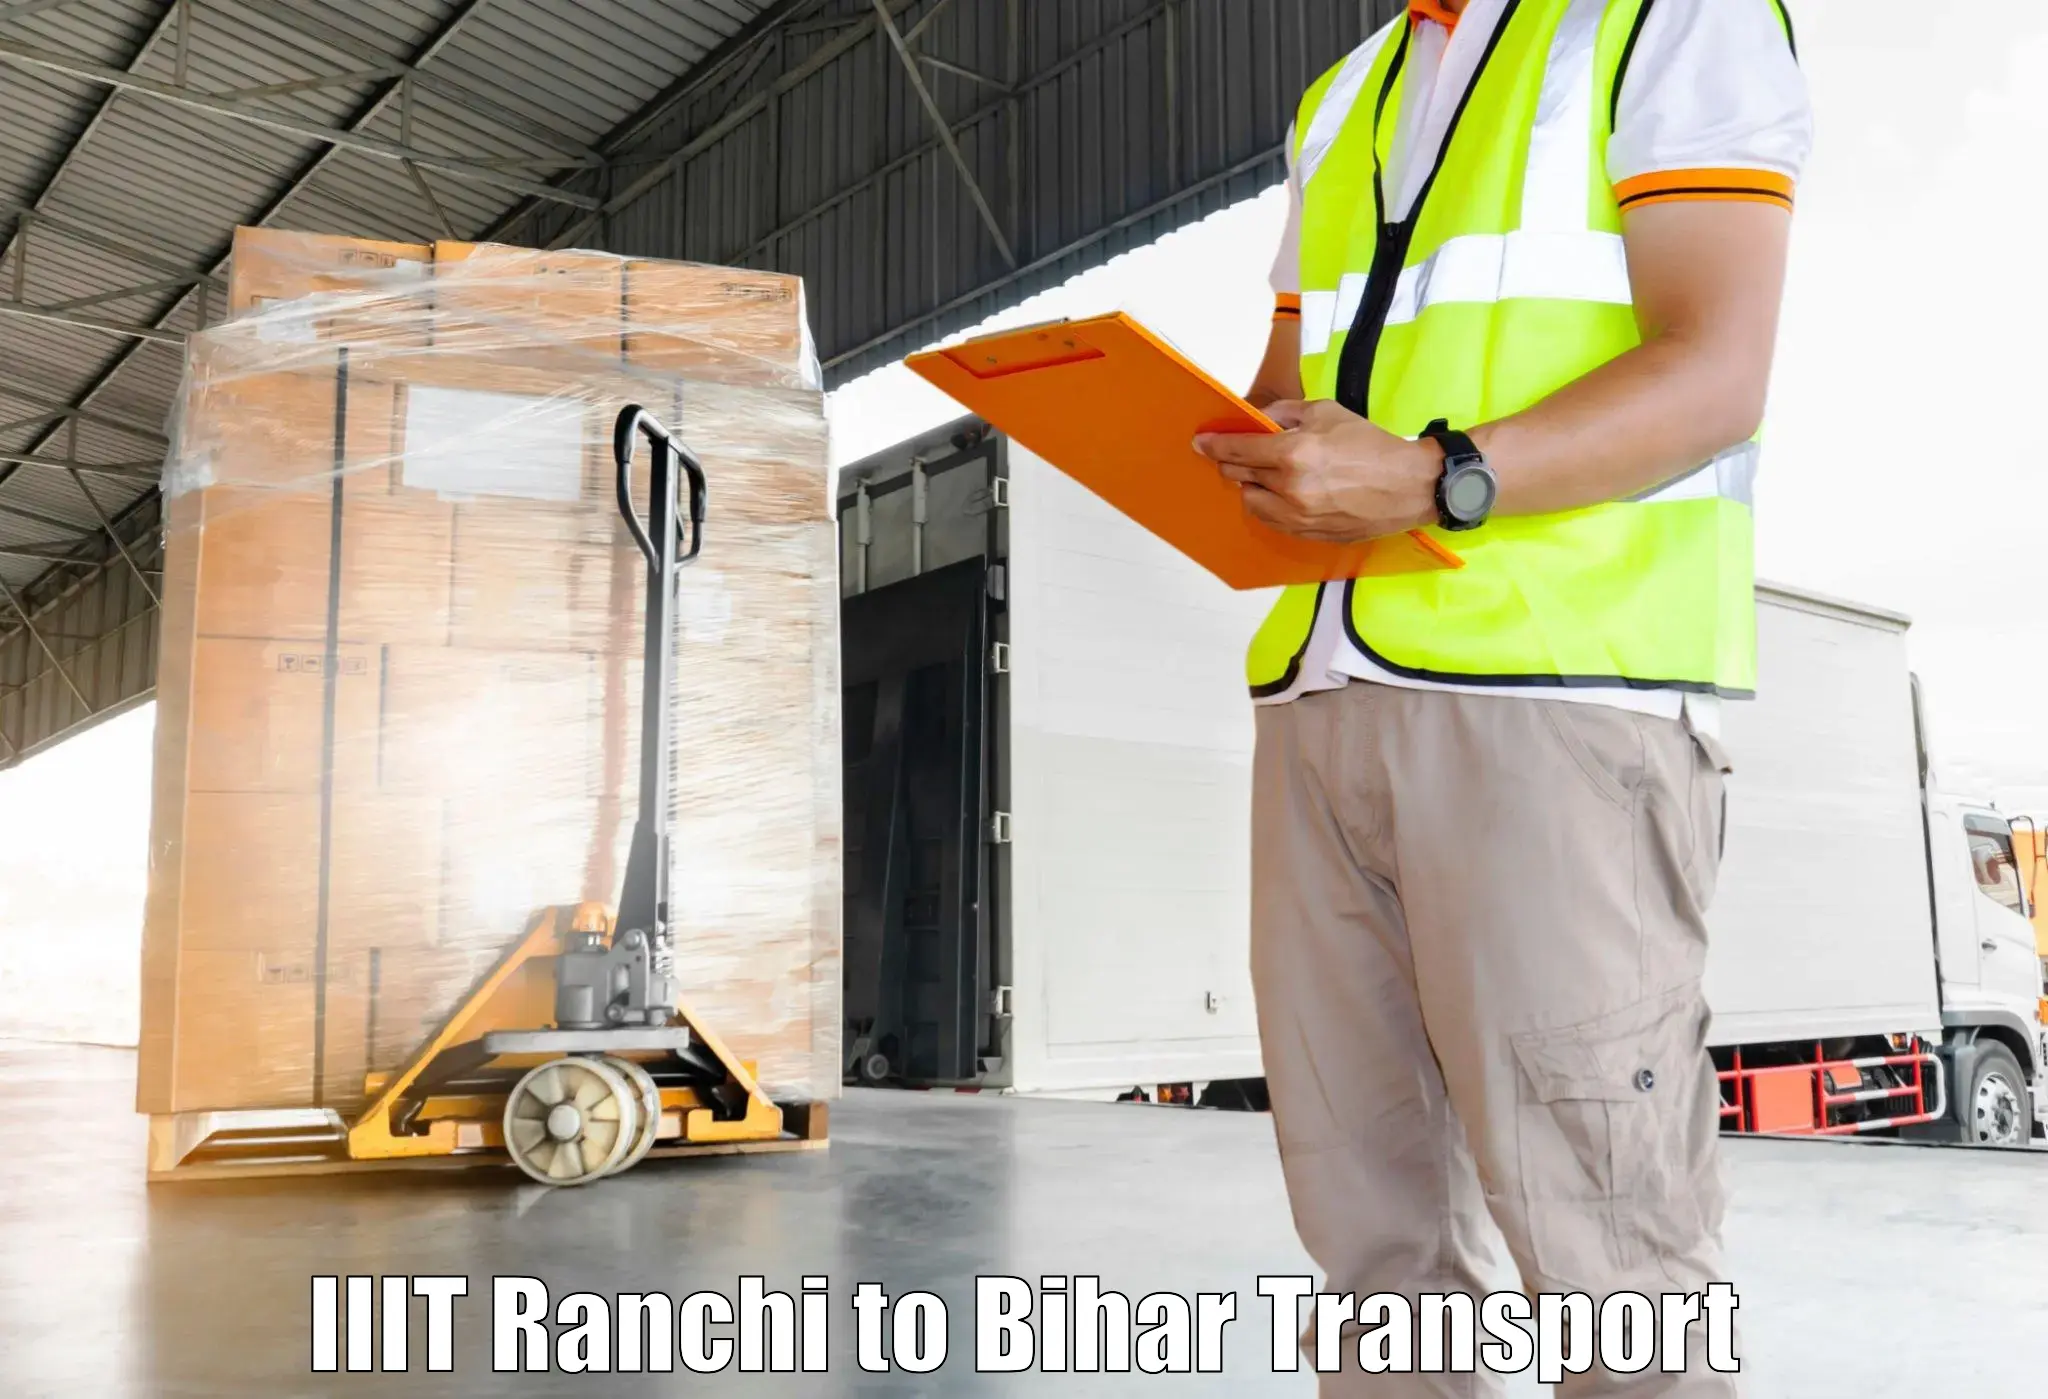 Domestic goods transportation services IIIT Ranchi to Bhojpur